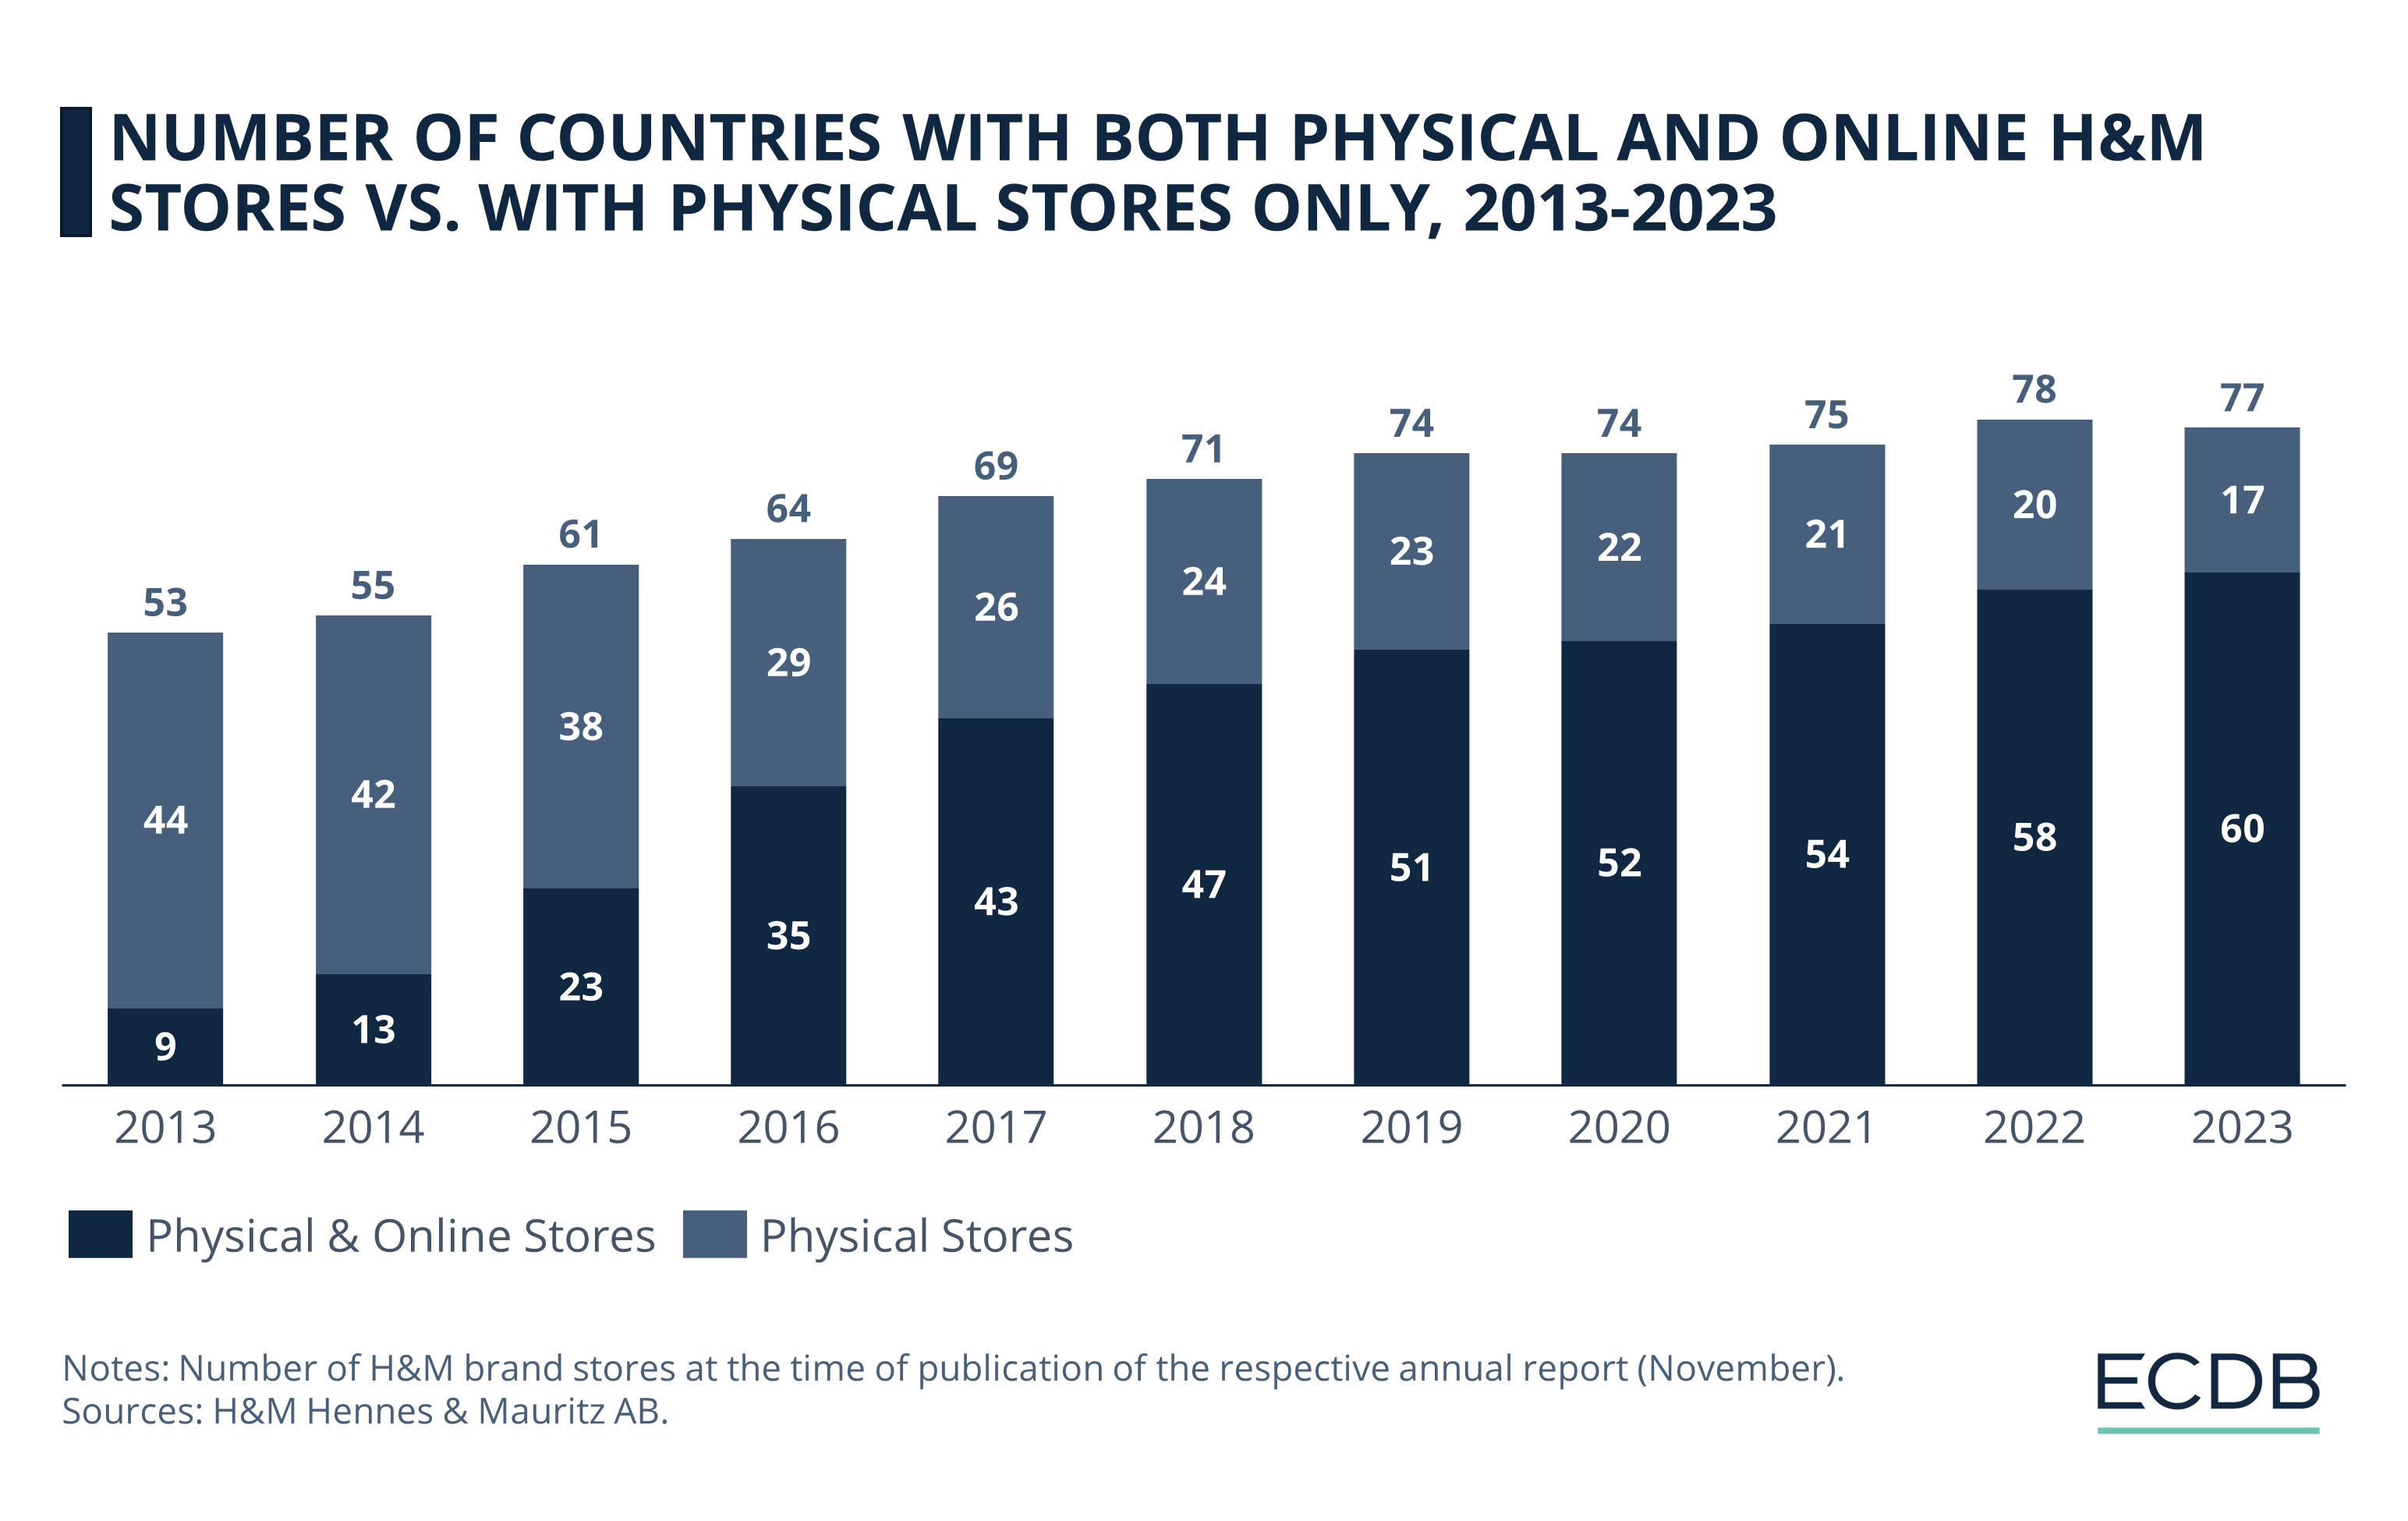 Number of Countries With Both Physical and Online H&M Stores vs. Physical Stores Only, 2013-2023